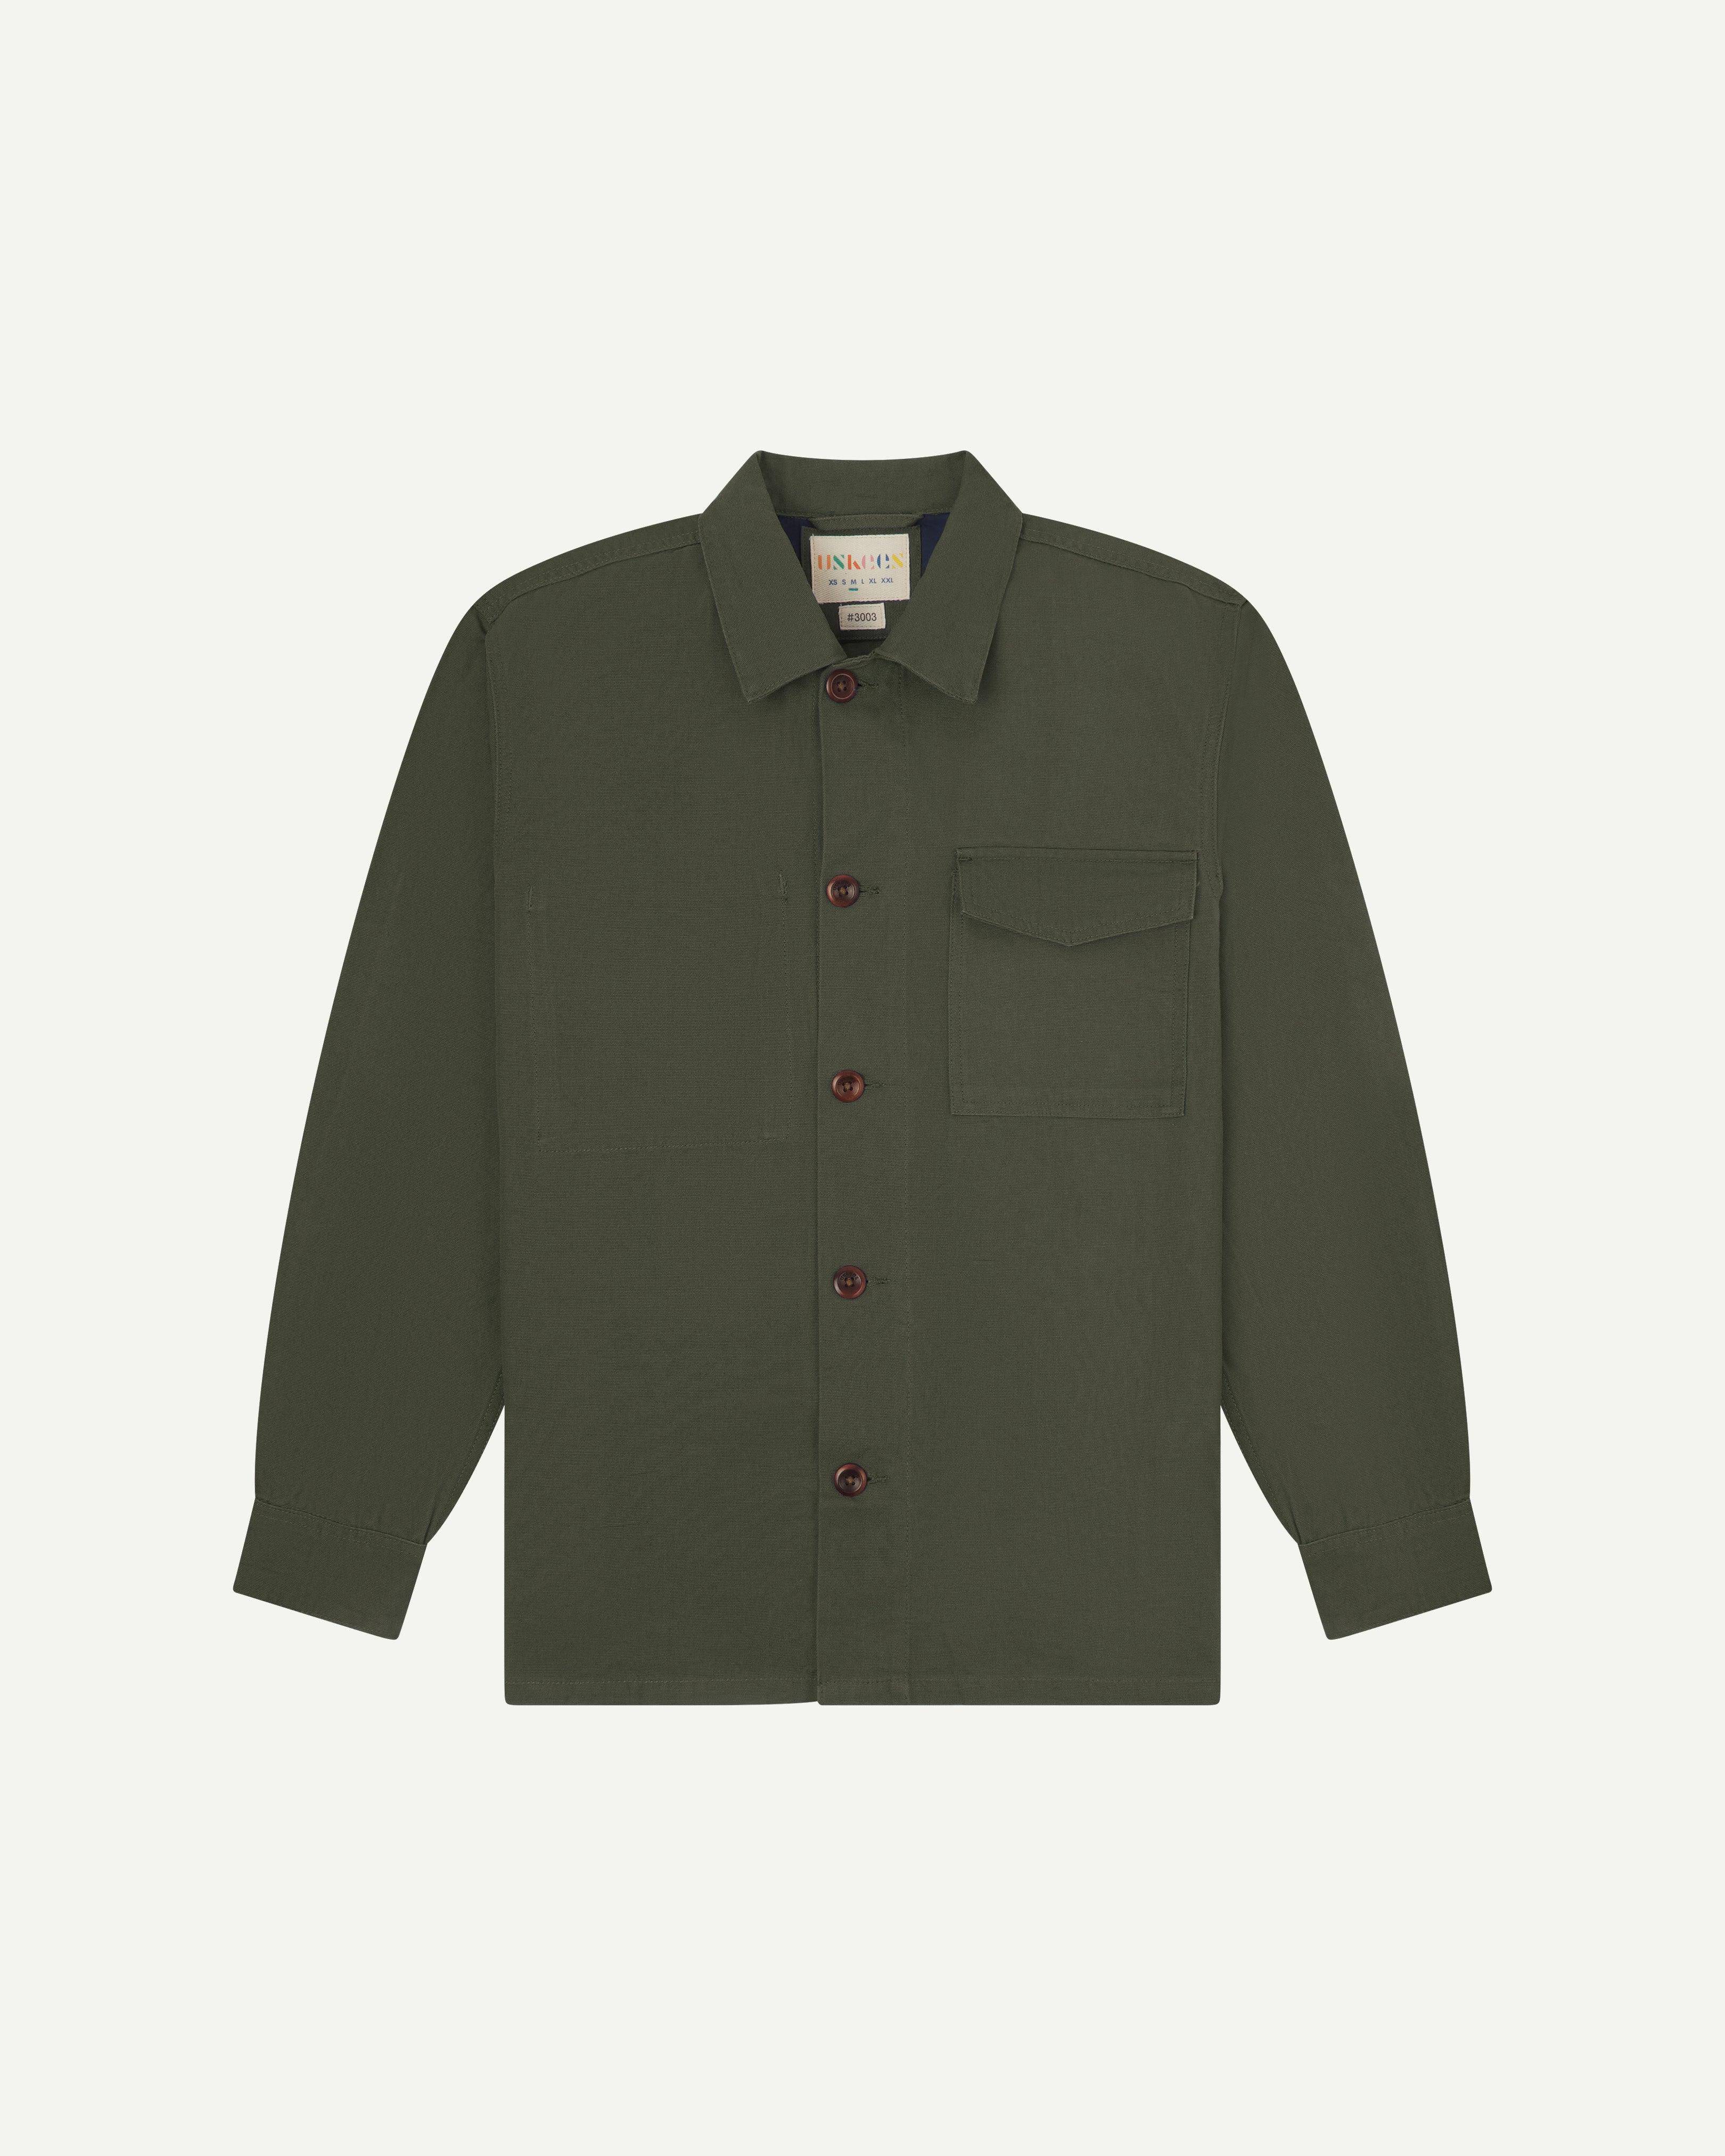 Front flat shot ofdull green #3003 men's workshirt from Uskees. Showing chest pocket with flap and corozo buttons.